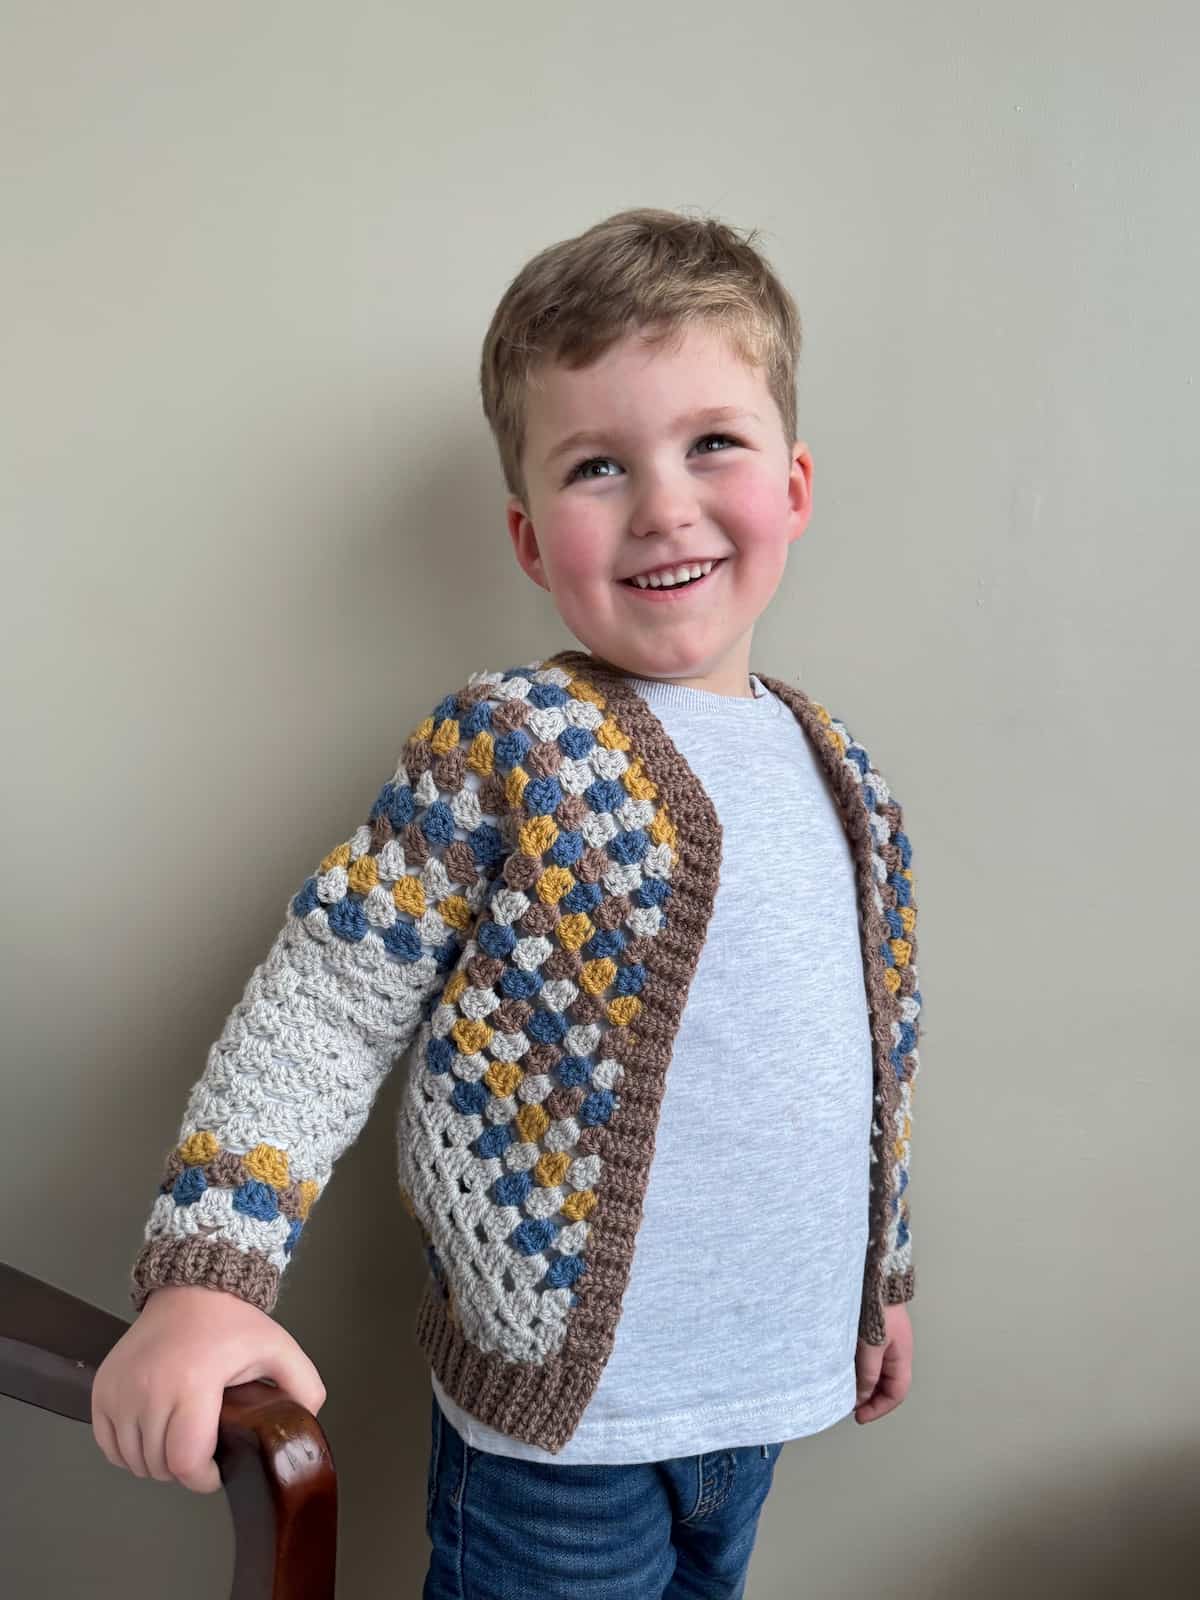 A young boy wearing a crocheted cardigan in blue, grey, brown and yellow stripes.